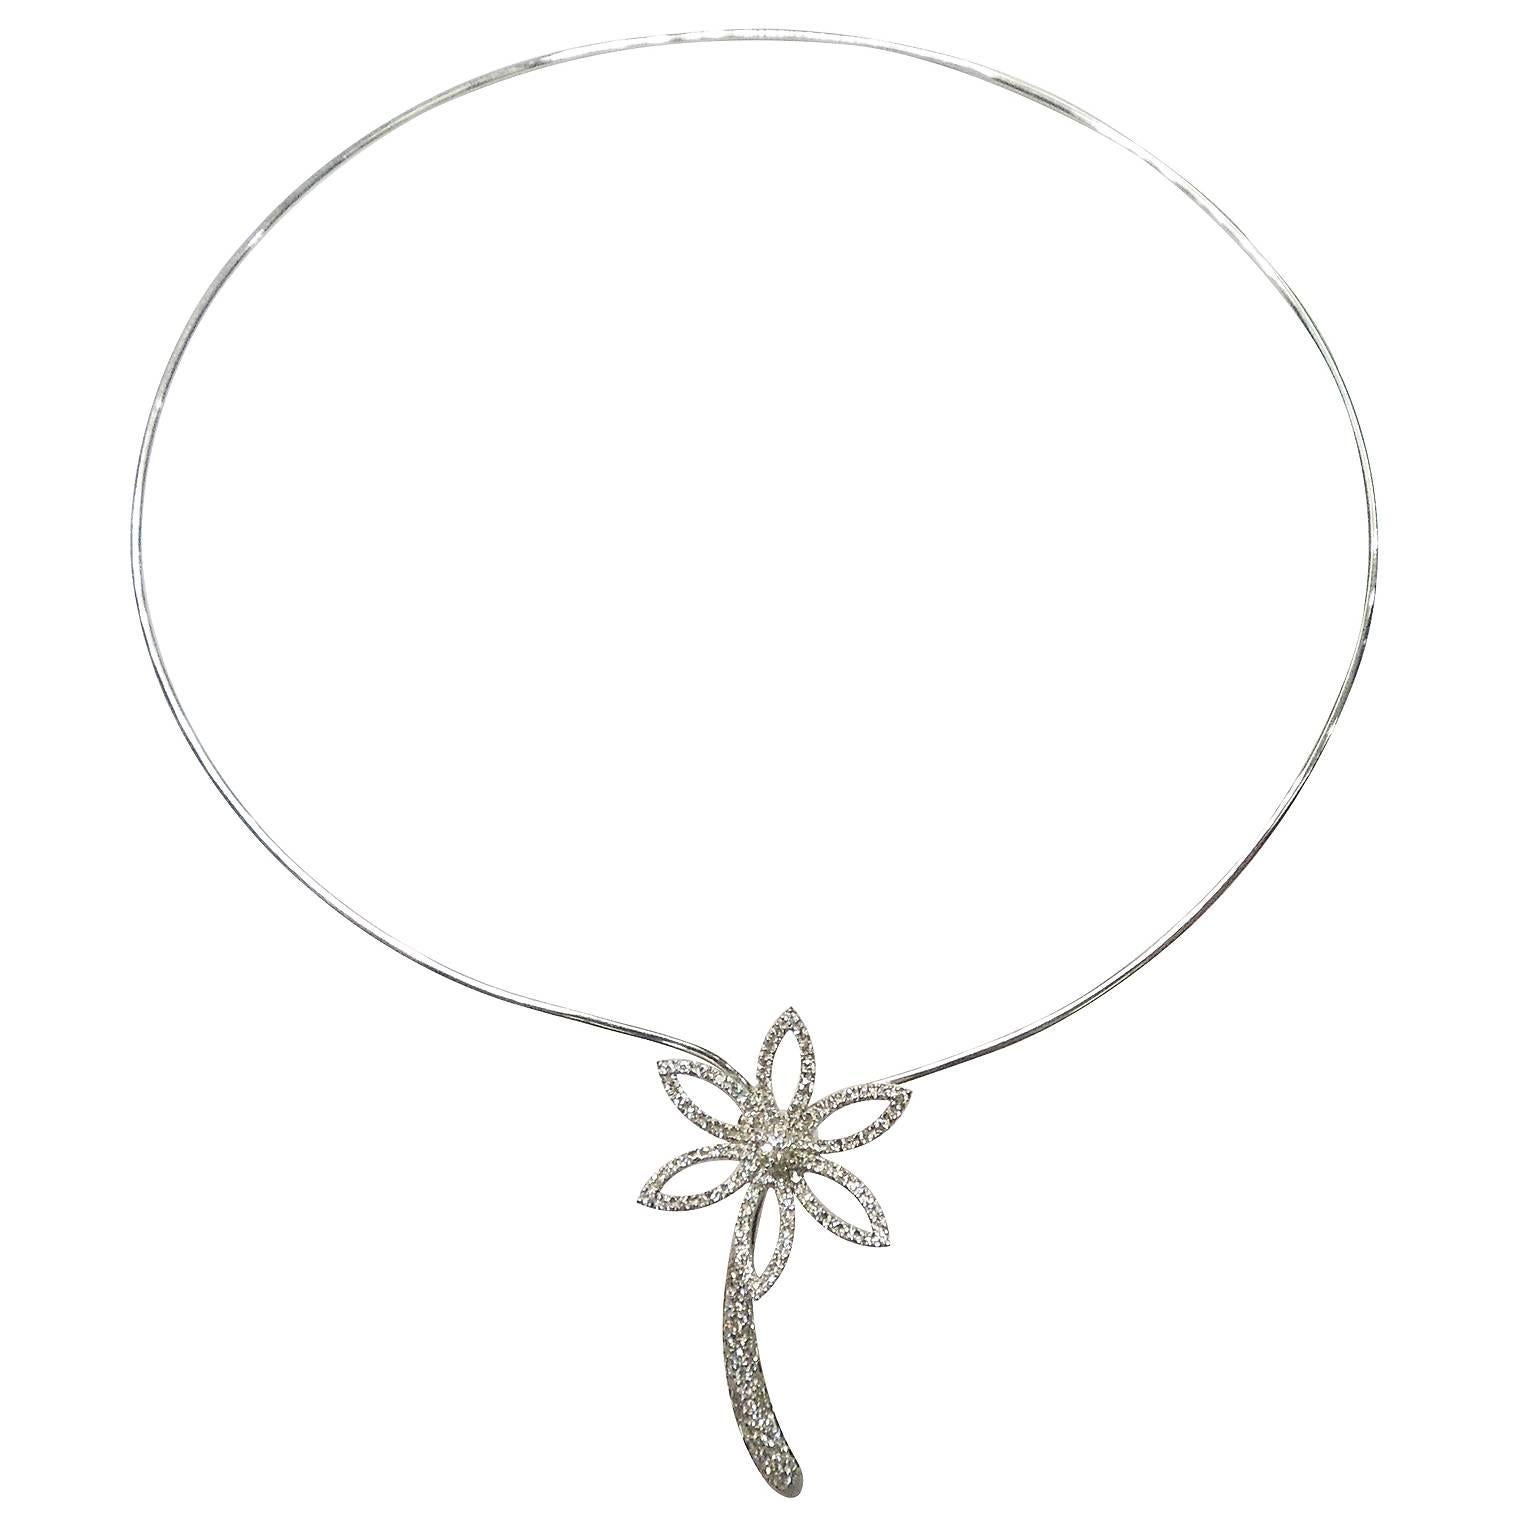 18K White Gold and Diamond Palm Tree Necklace

Beautiful work done on palm tree. All done in diamonds. Pendant is attached to rest of necklace.

Necklace will fit a 16 inch neck. 

2.80ct. White Diamonds

Necklaces clasps behind palm tree with